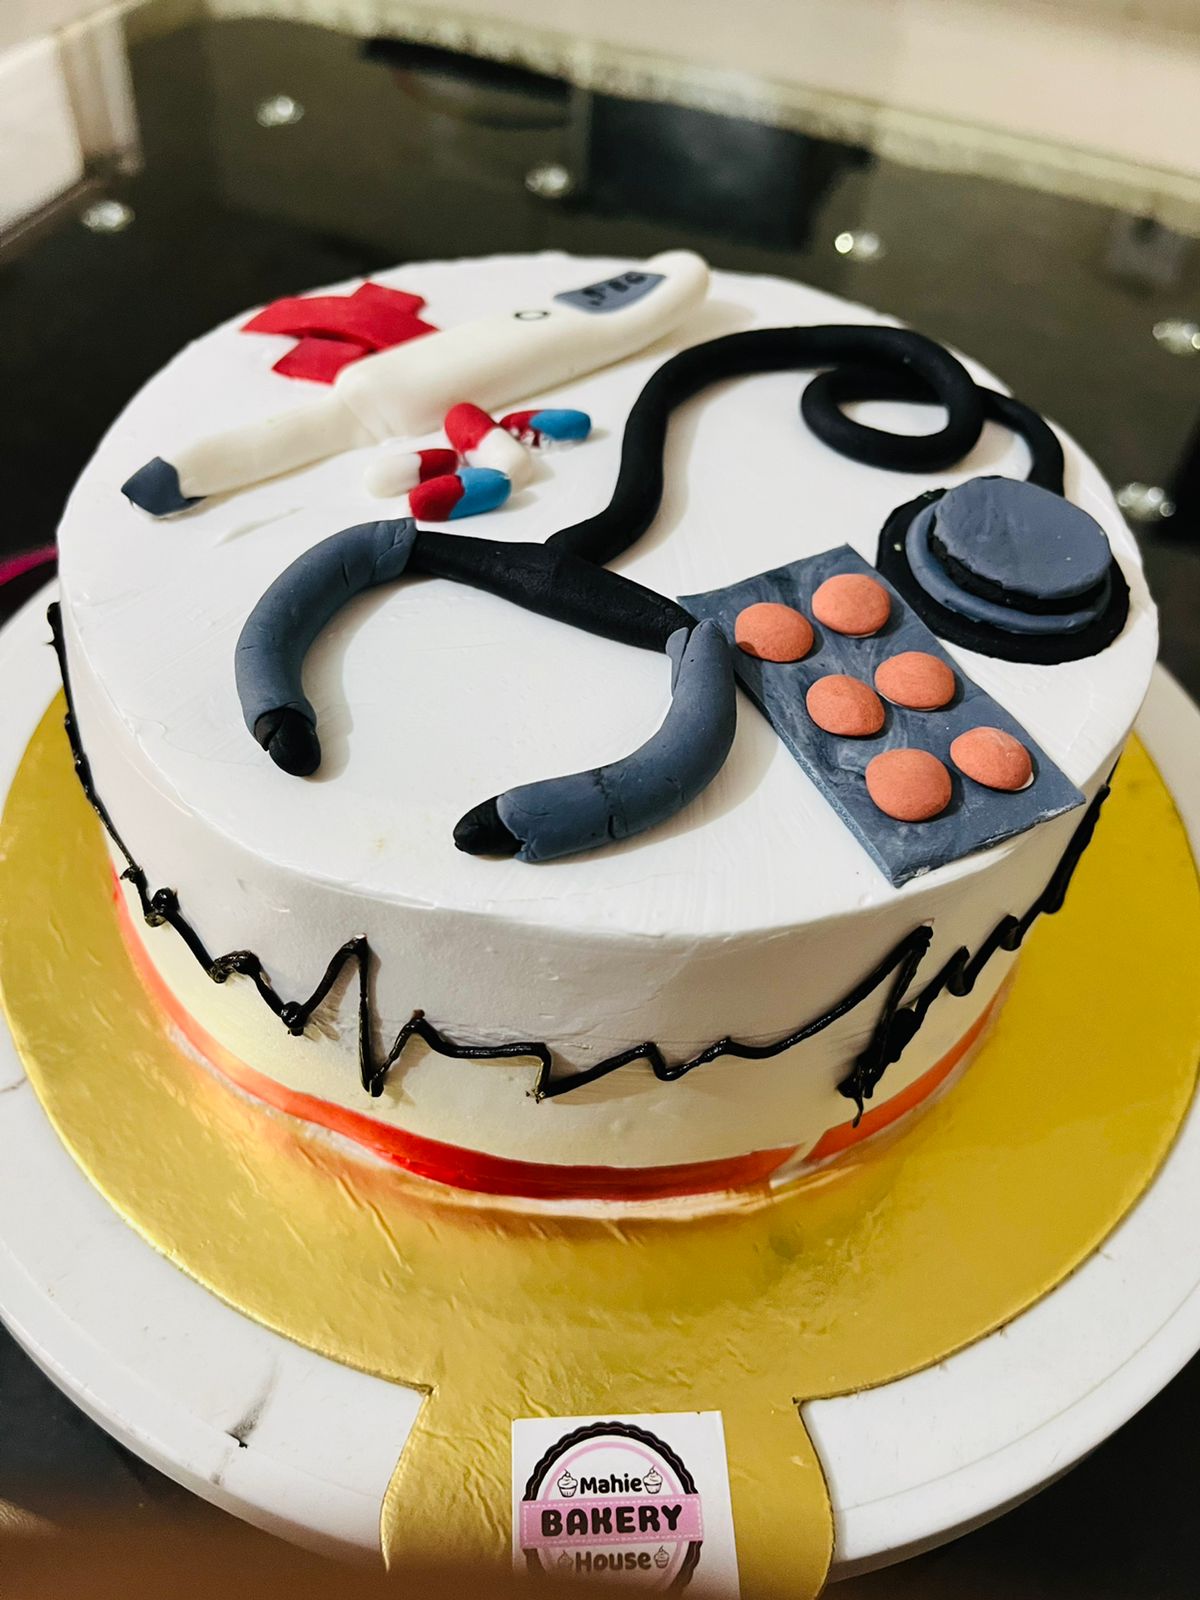 Discover more than 36 special birthday cake for doctor super hot - in ...